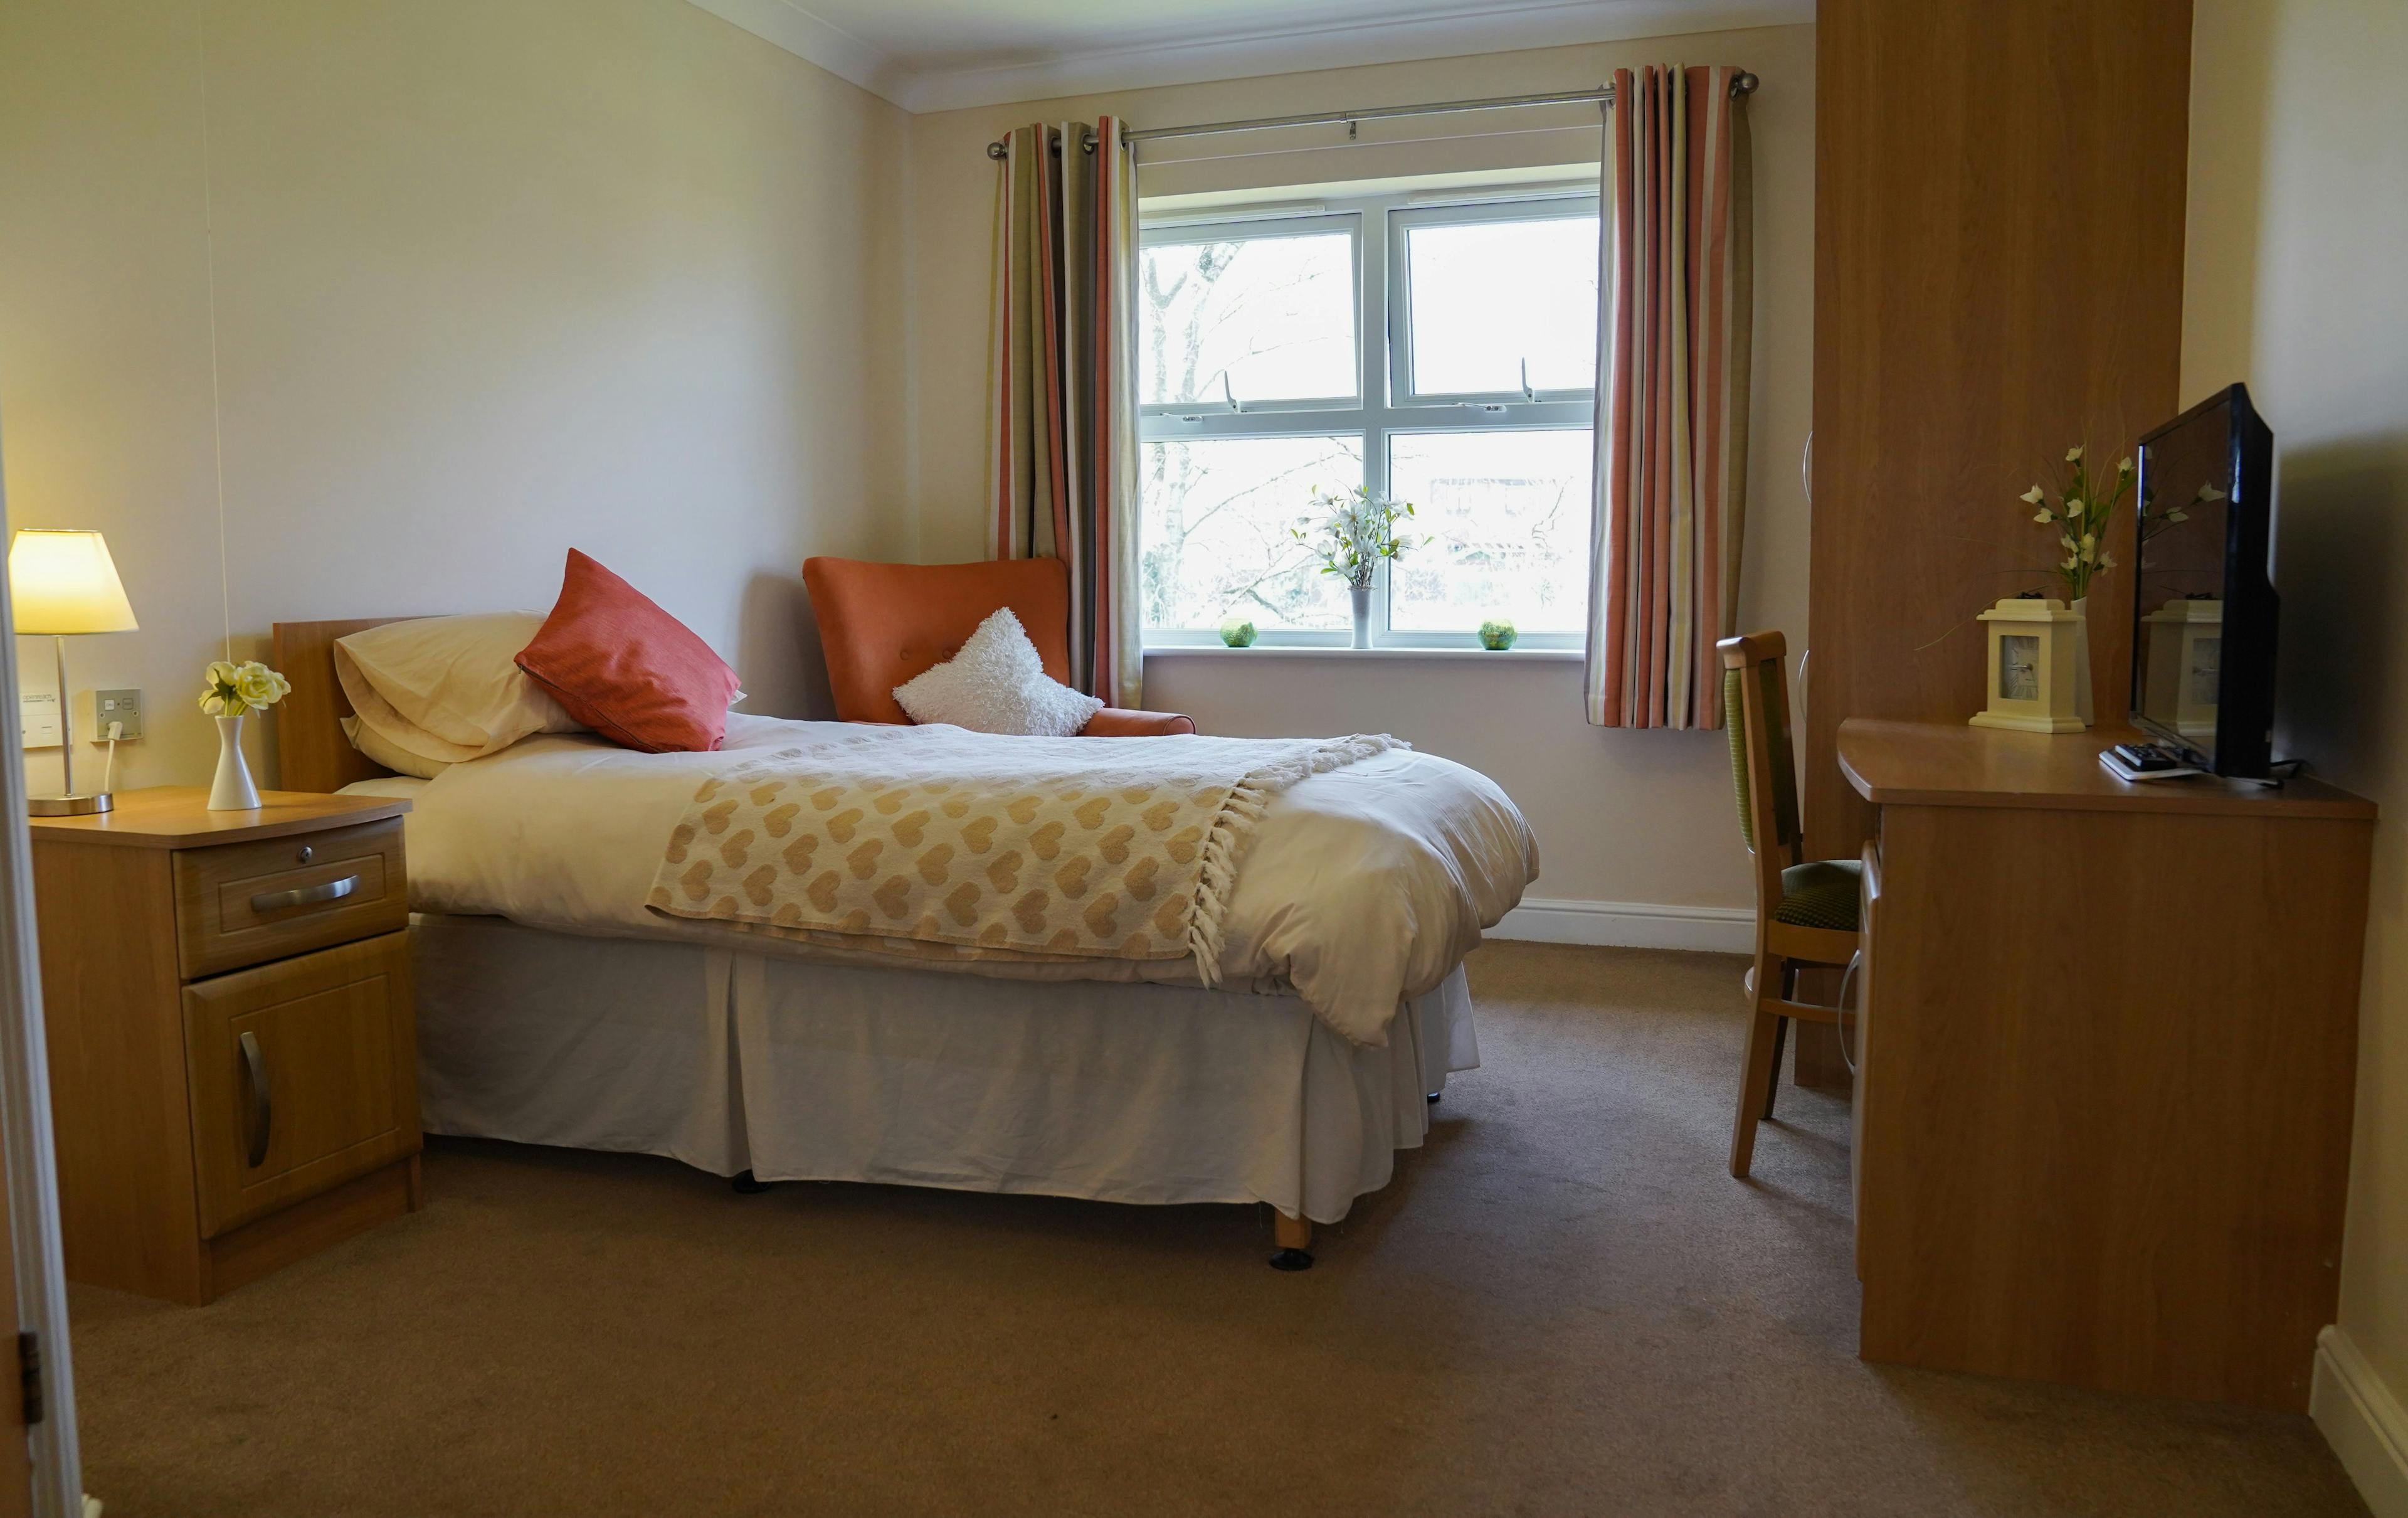 Bedroom of Lake View in Telford, Shopshire